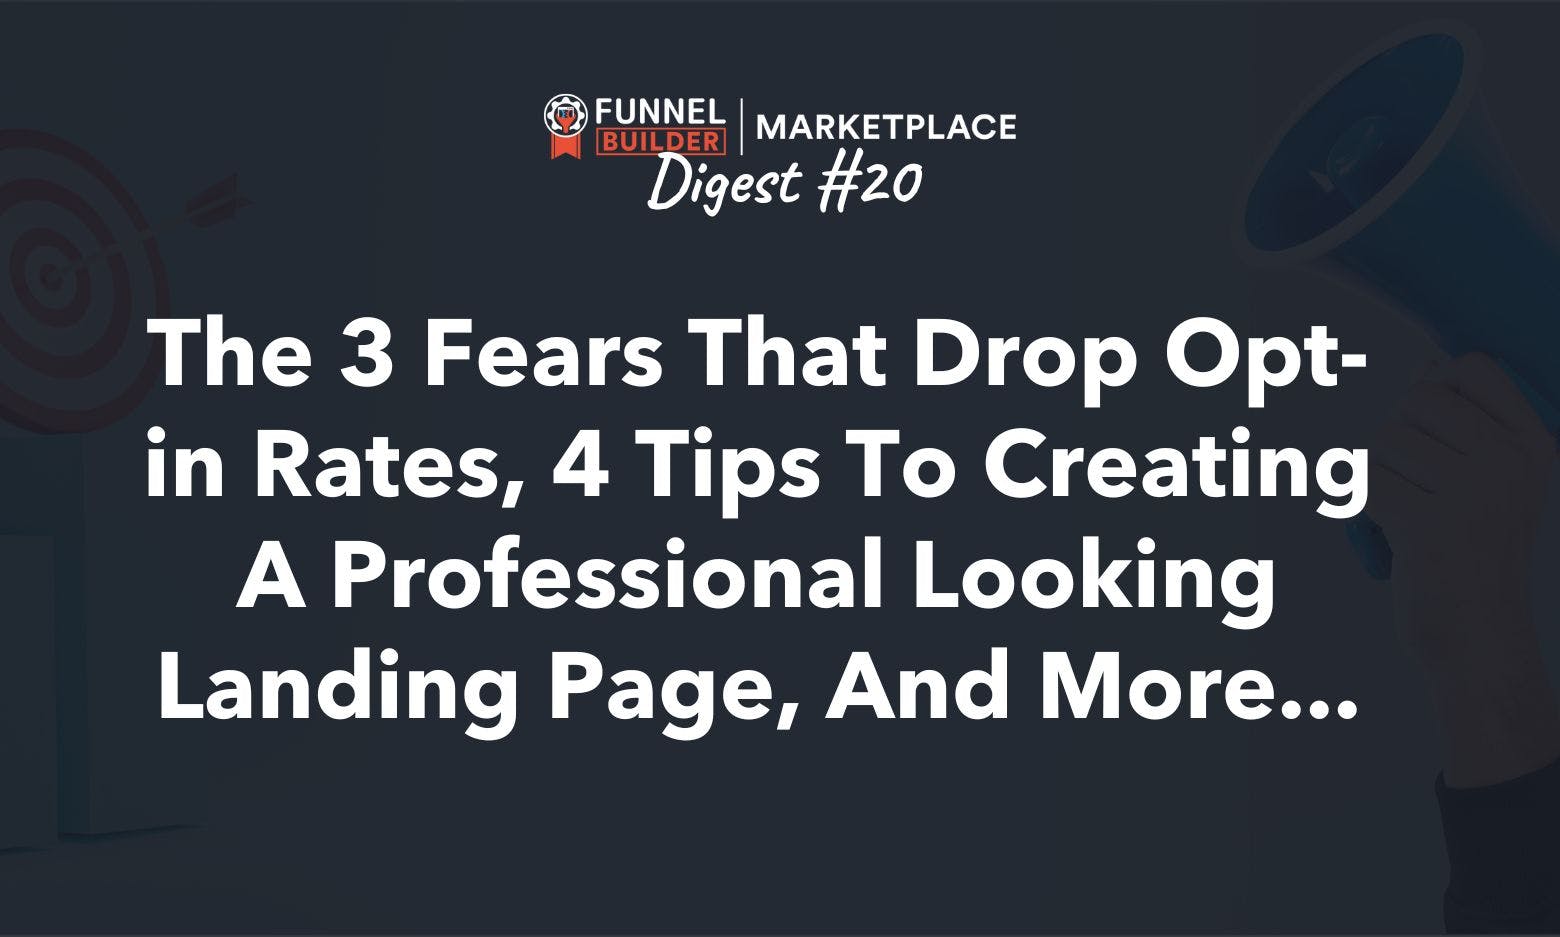 Rolodex Digest #20: The 3 fears that drop opt-in rates, 4 tips to creating a professional looking landing page, and more...